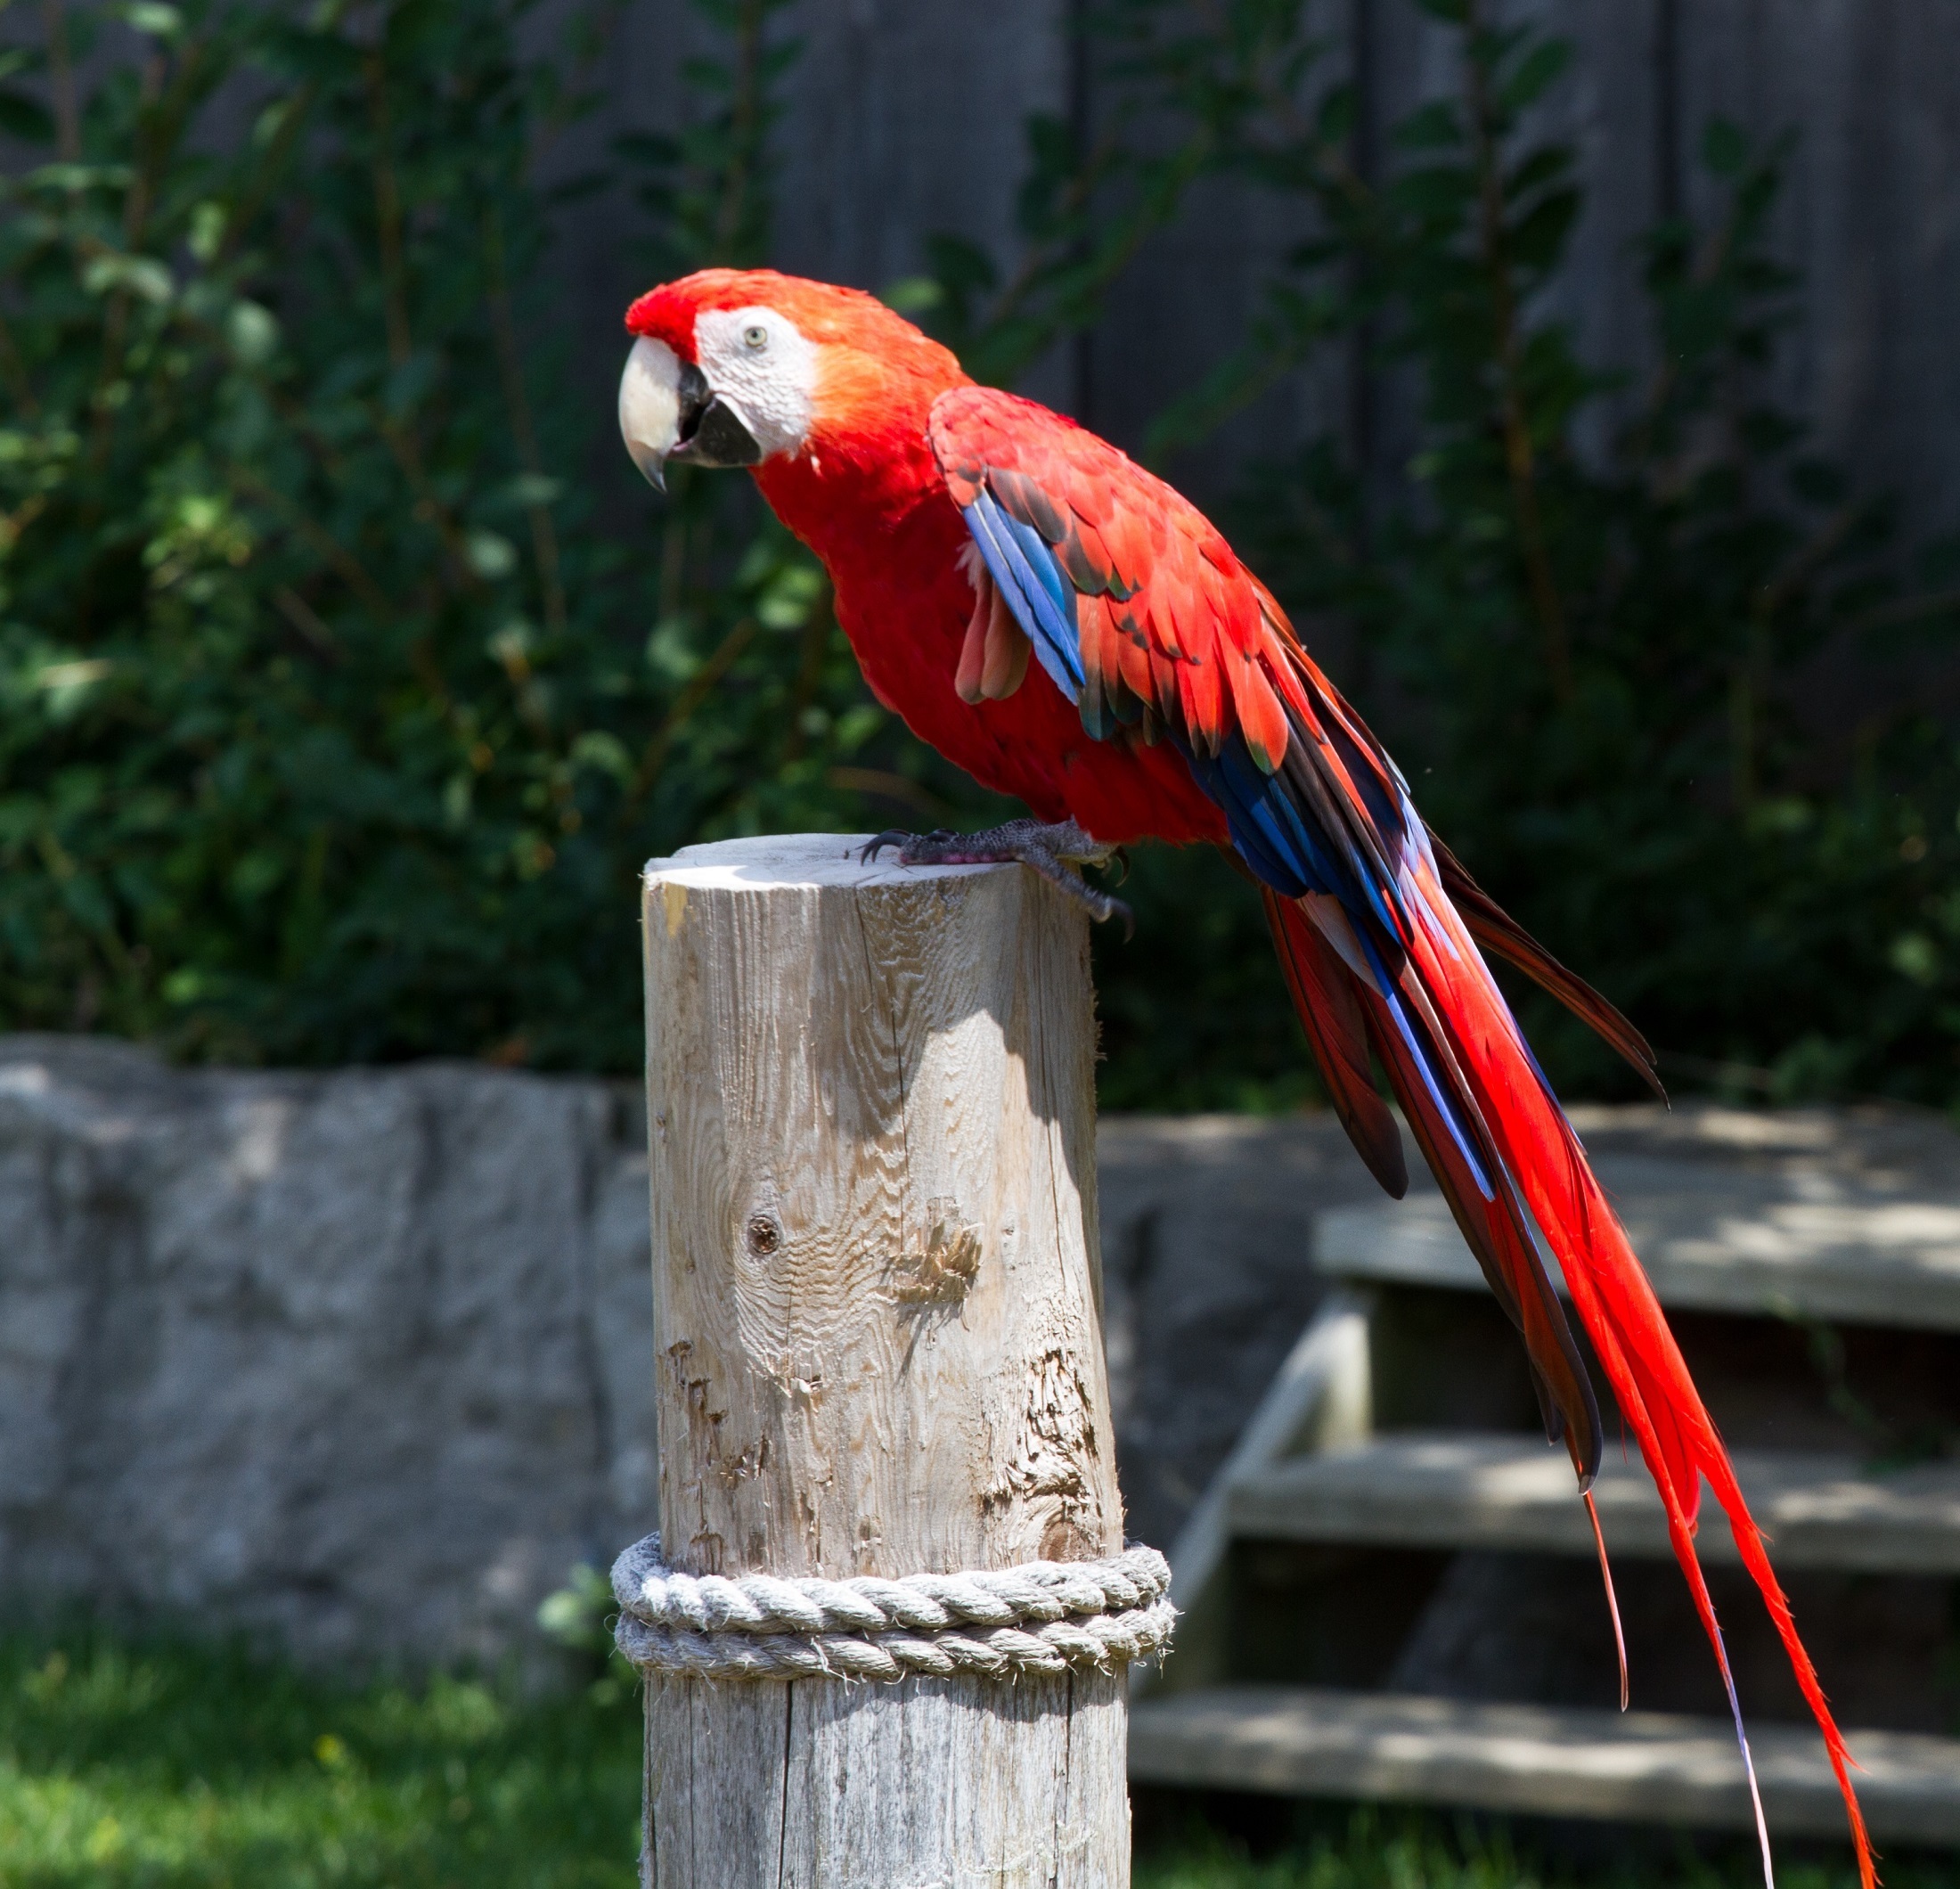 Red macaw photo